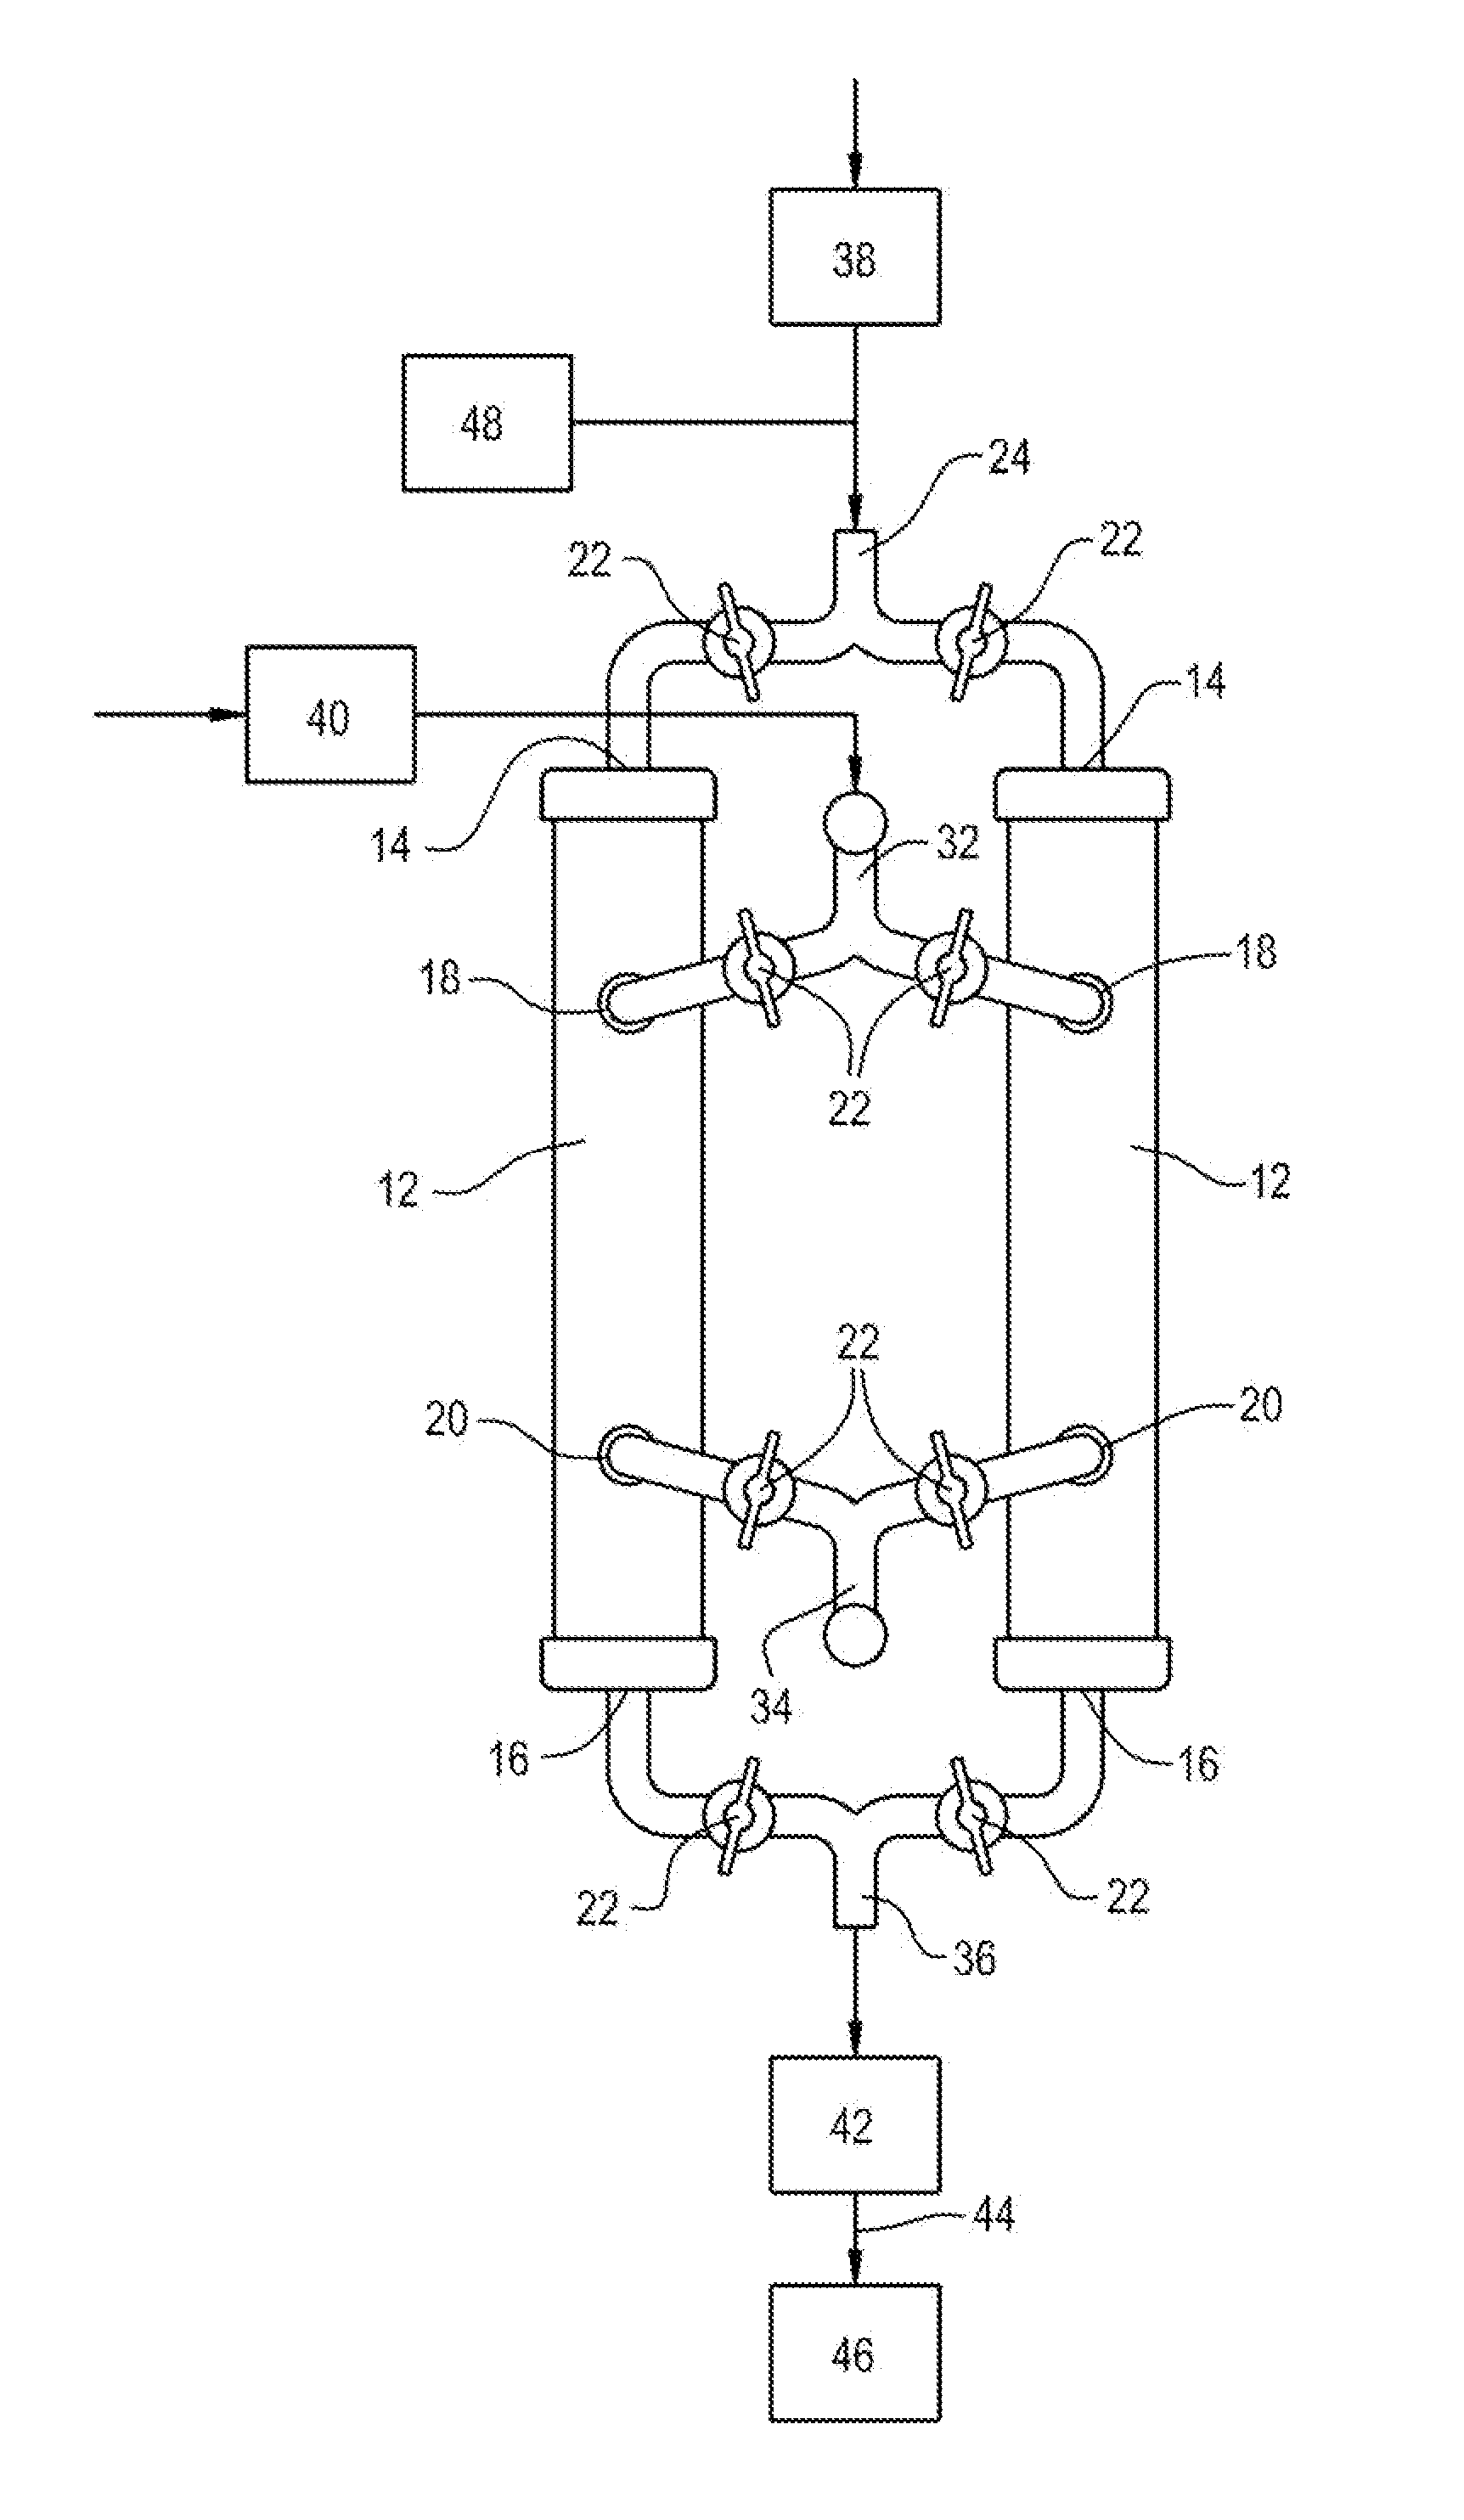 Personal airway humidification and oxygen-enrichment apparatus and method